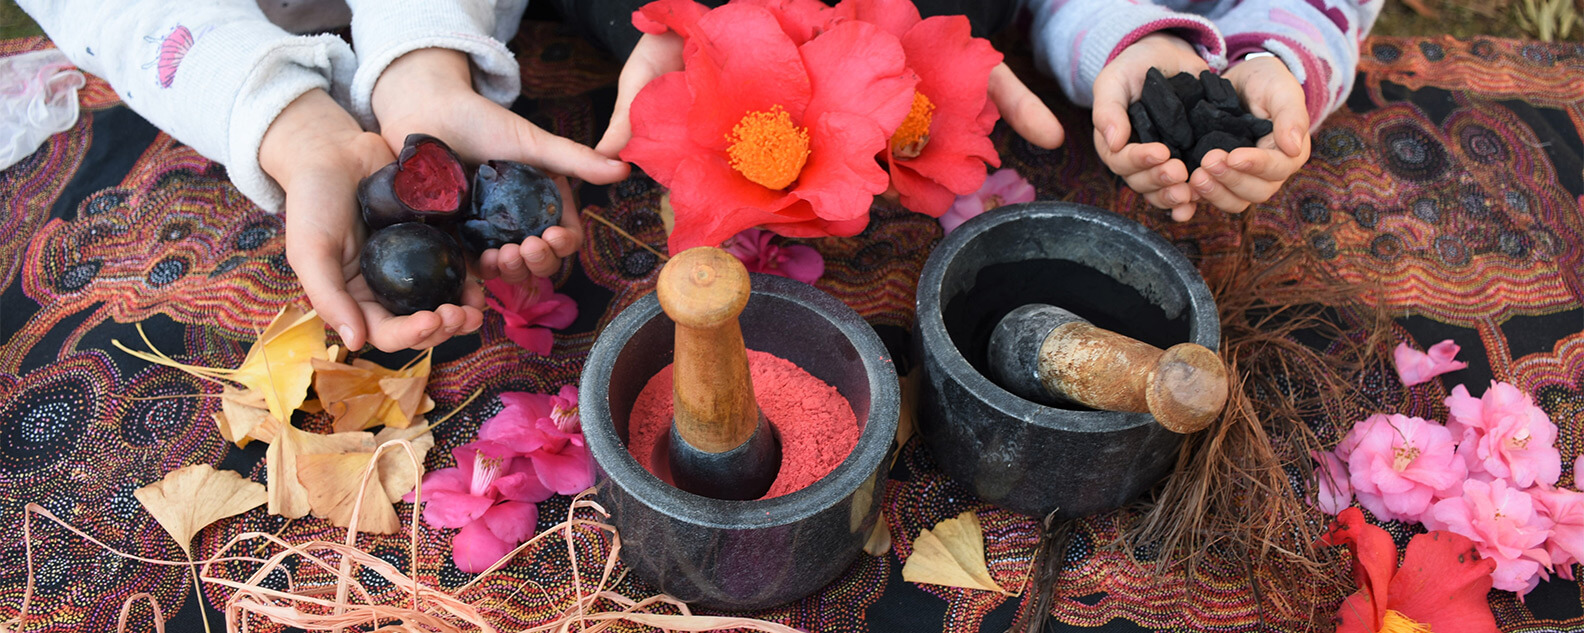 bowls of natural dyes, flowers and fruits